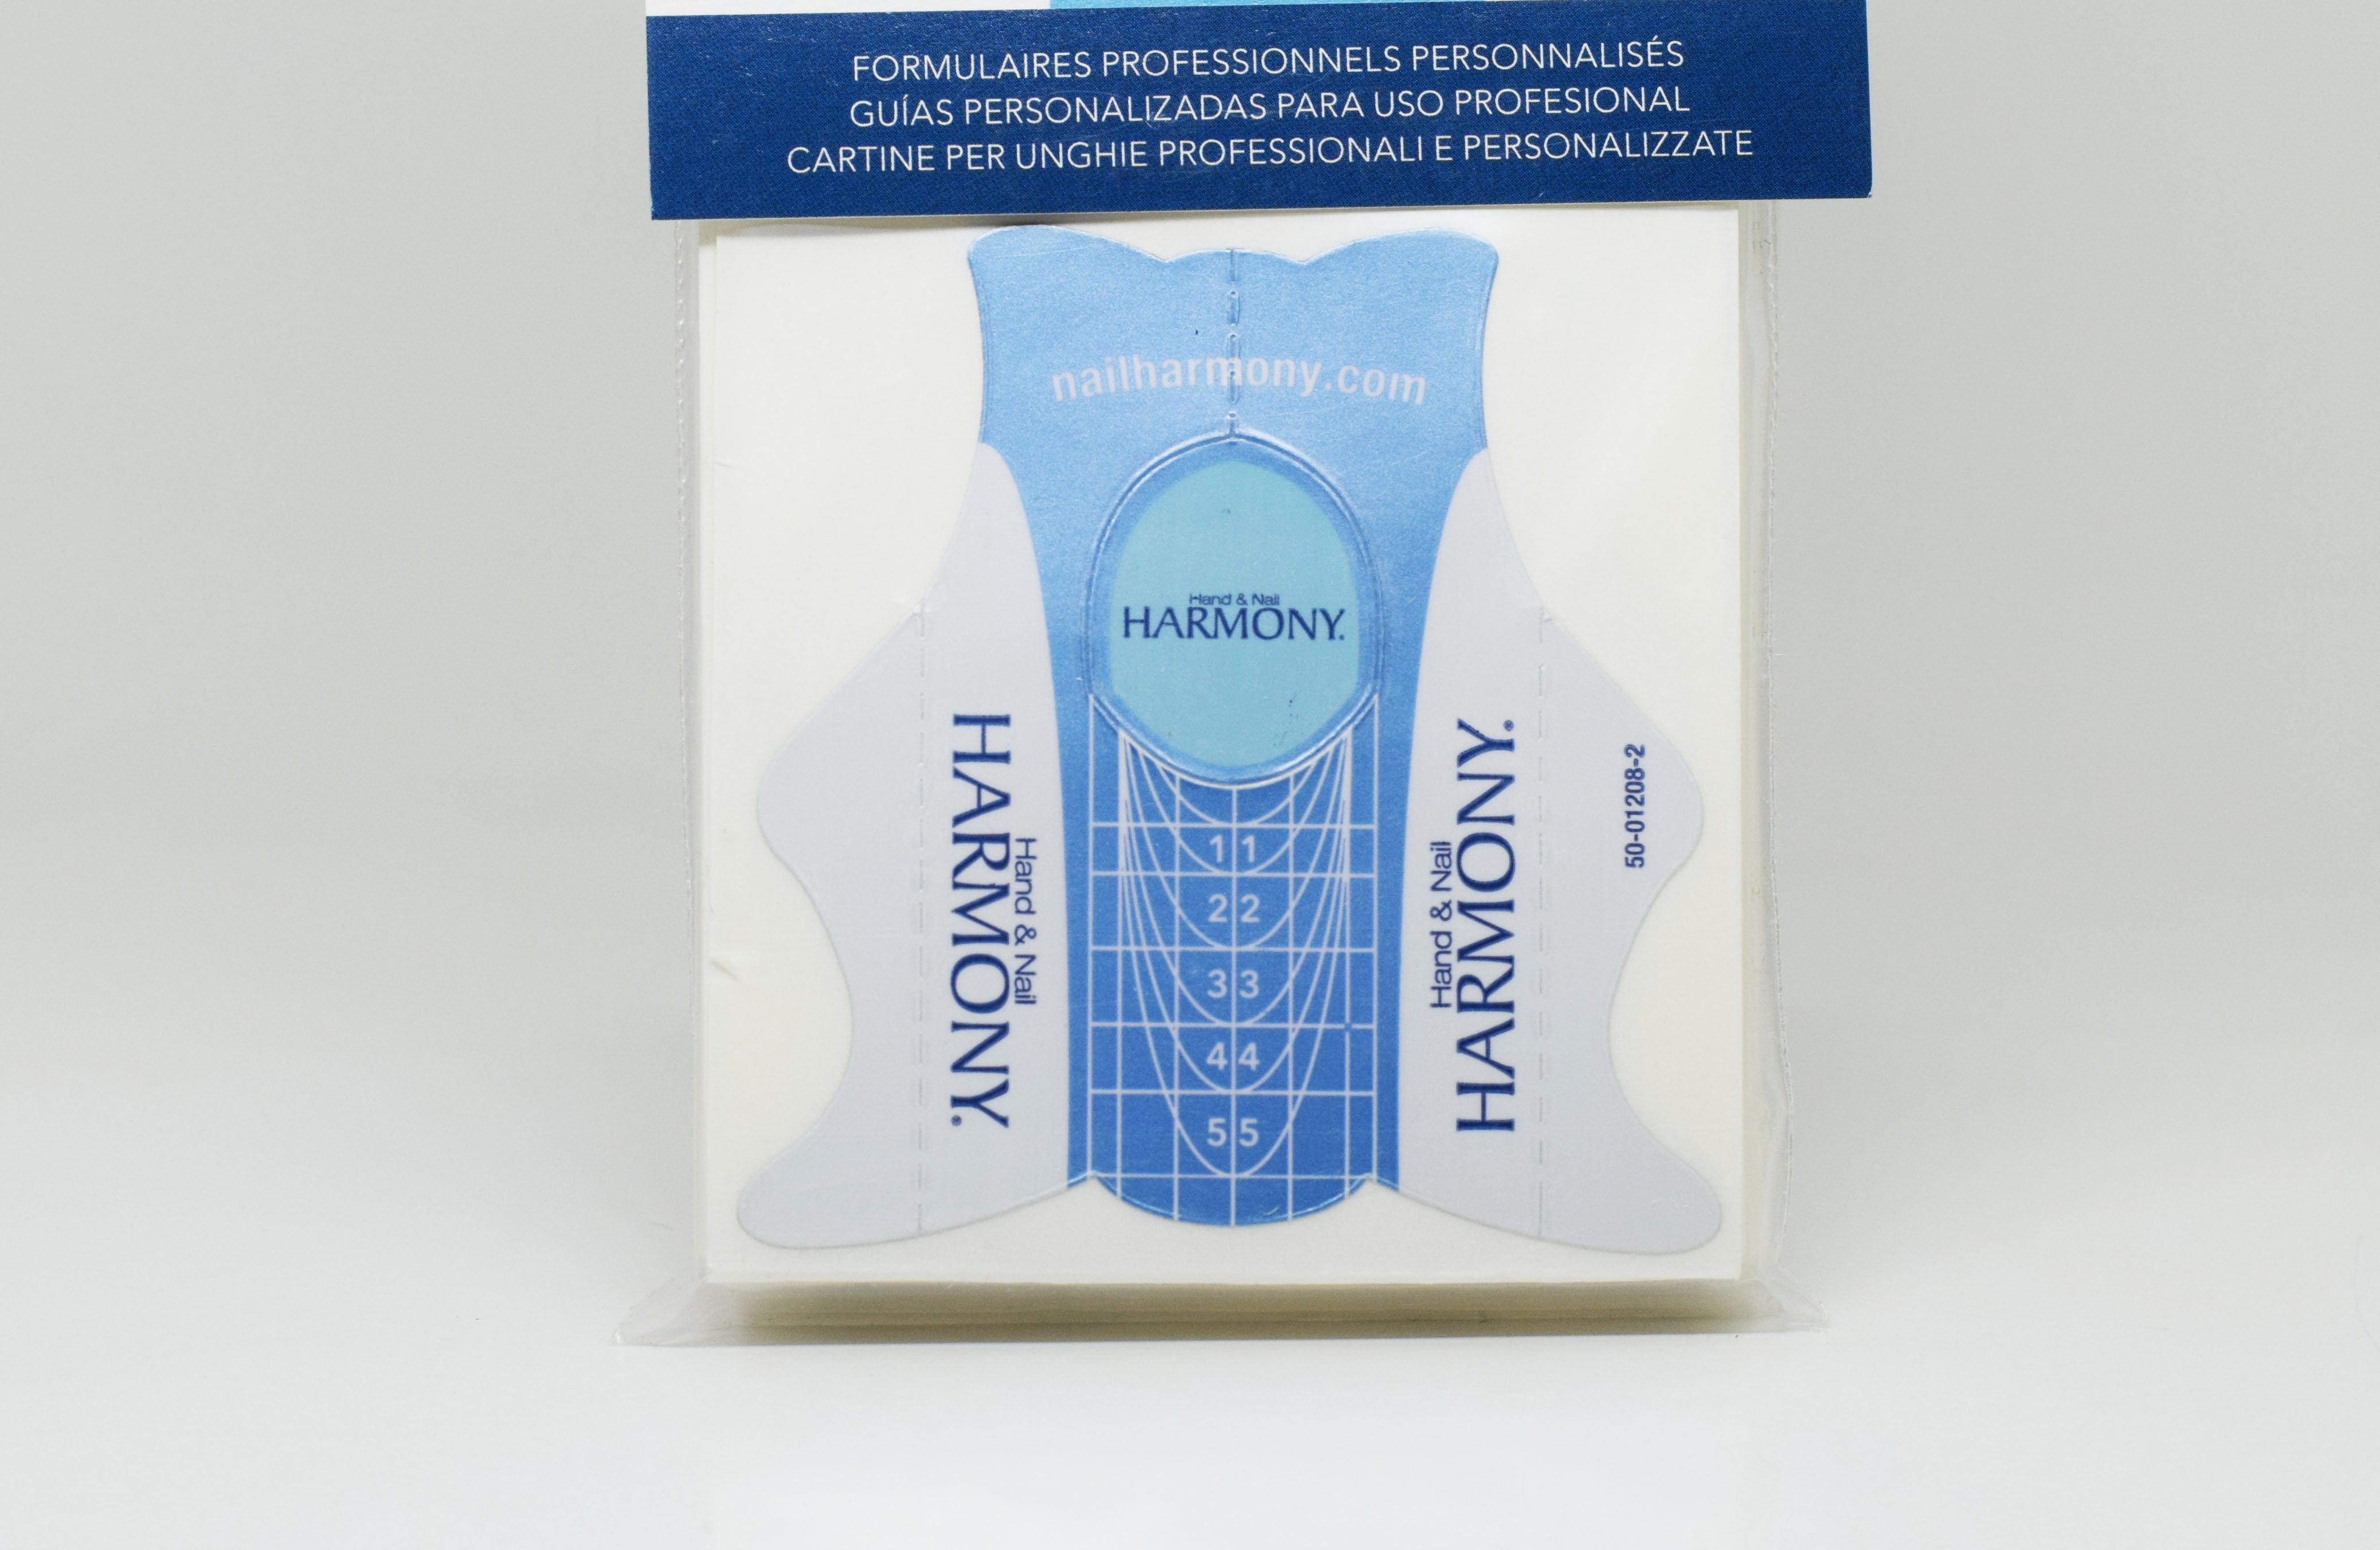 Harmony Prohesion Perfetto Nail Forms 100 Count #01239